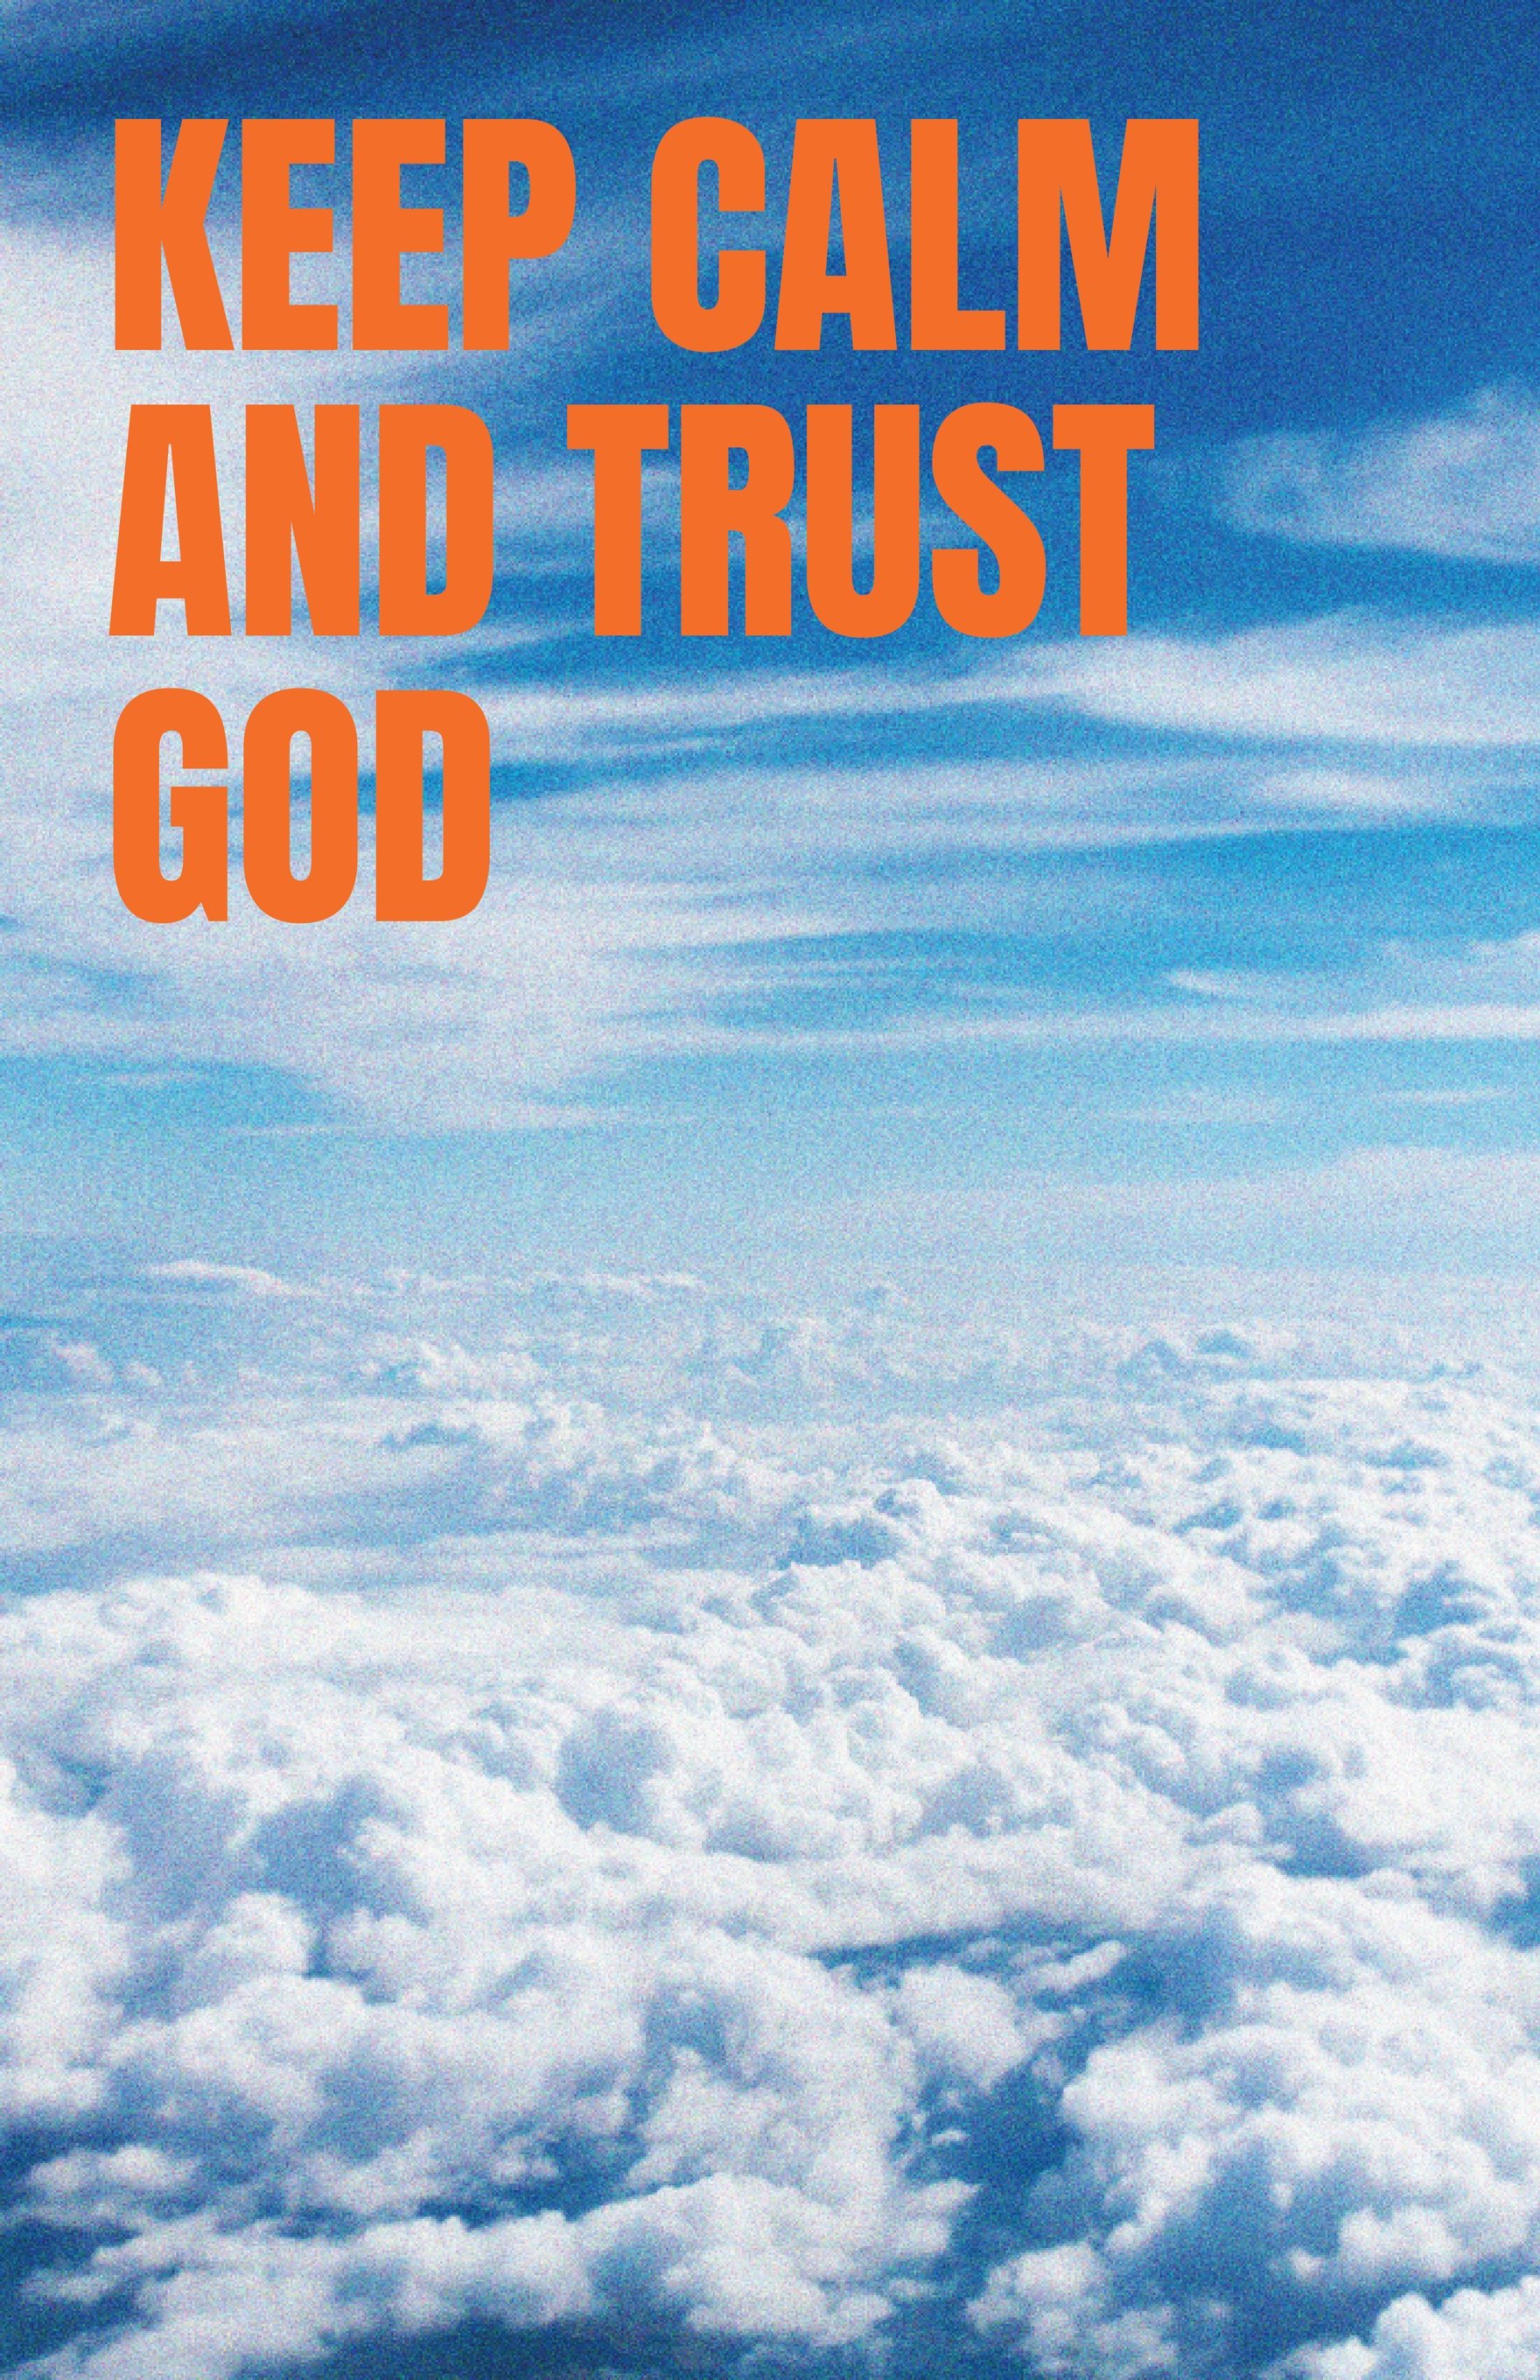 Free Keep Calm And Trust God Poster in Word, Google Docs, Illustrator, PSD, Apple Pages, Publisher, EPS, JPG, PNG